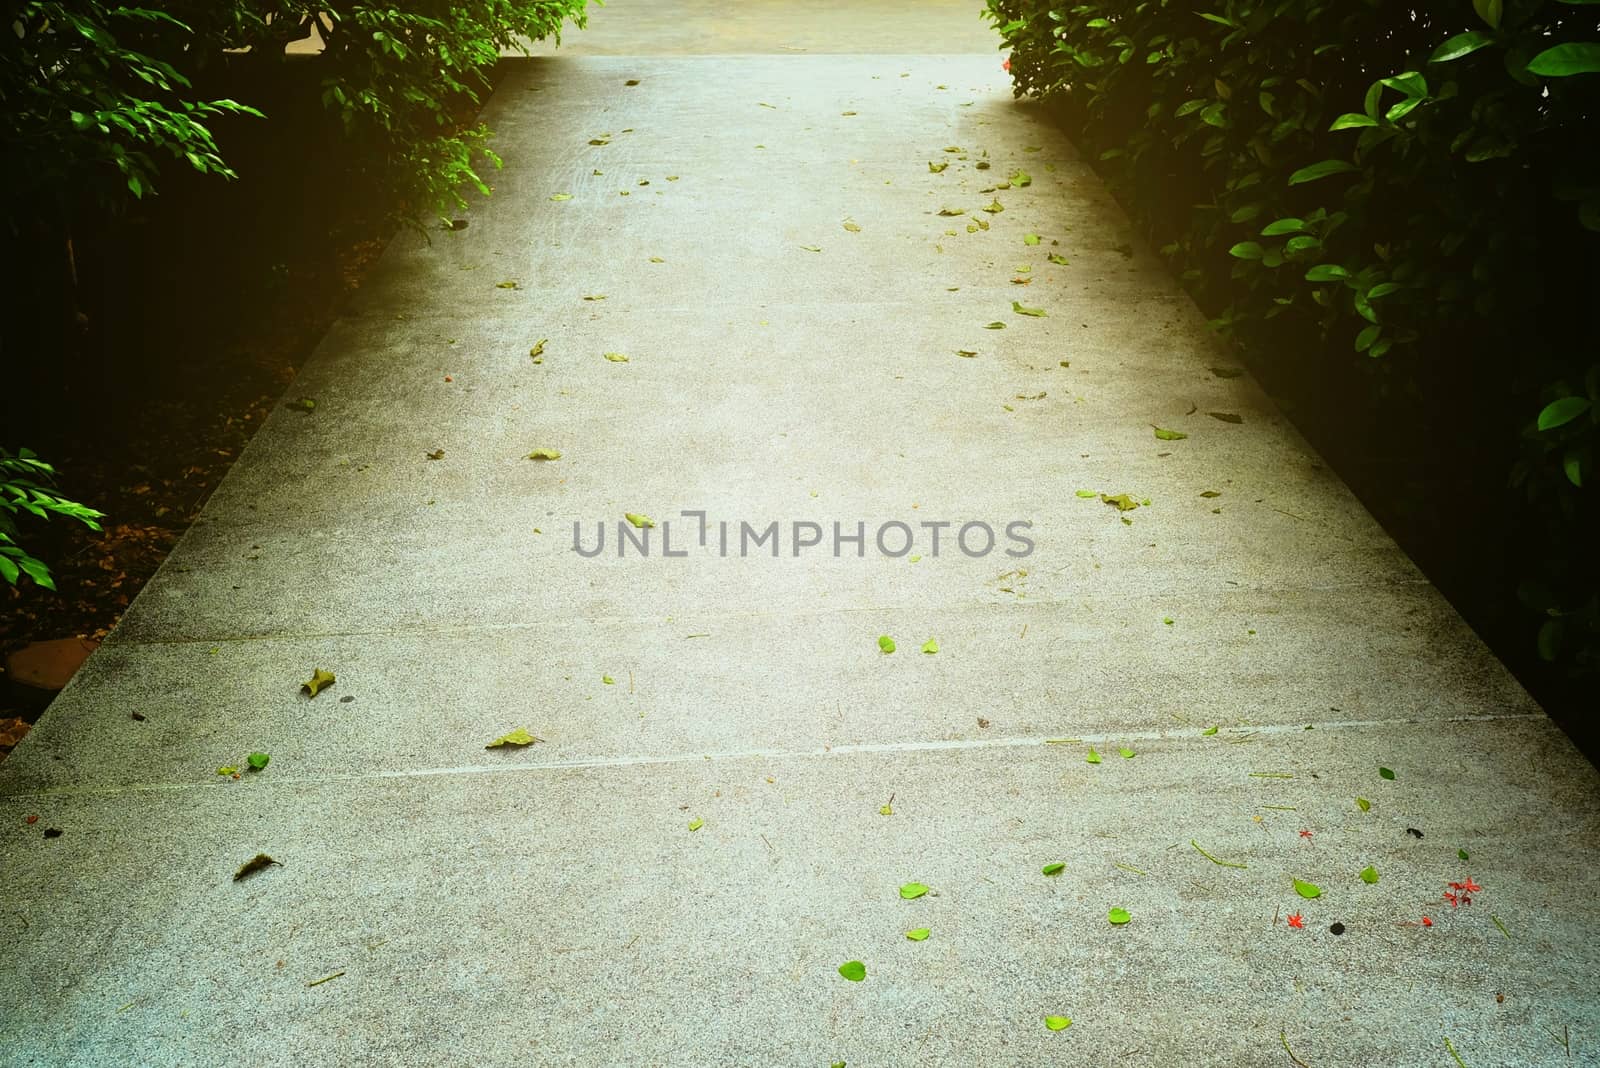 Concrete Pathway in The Park.